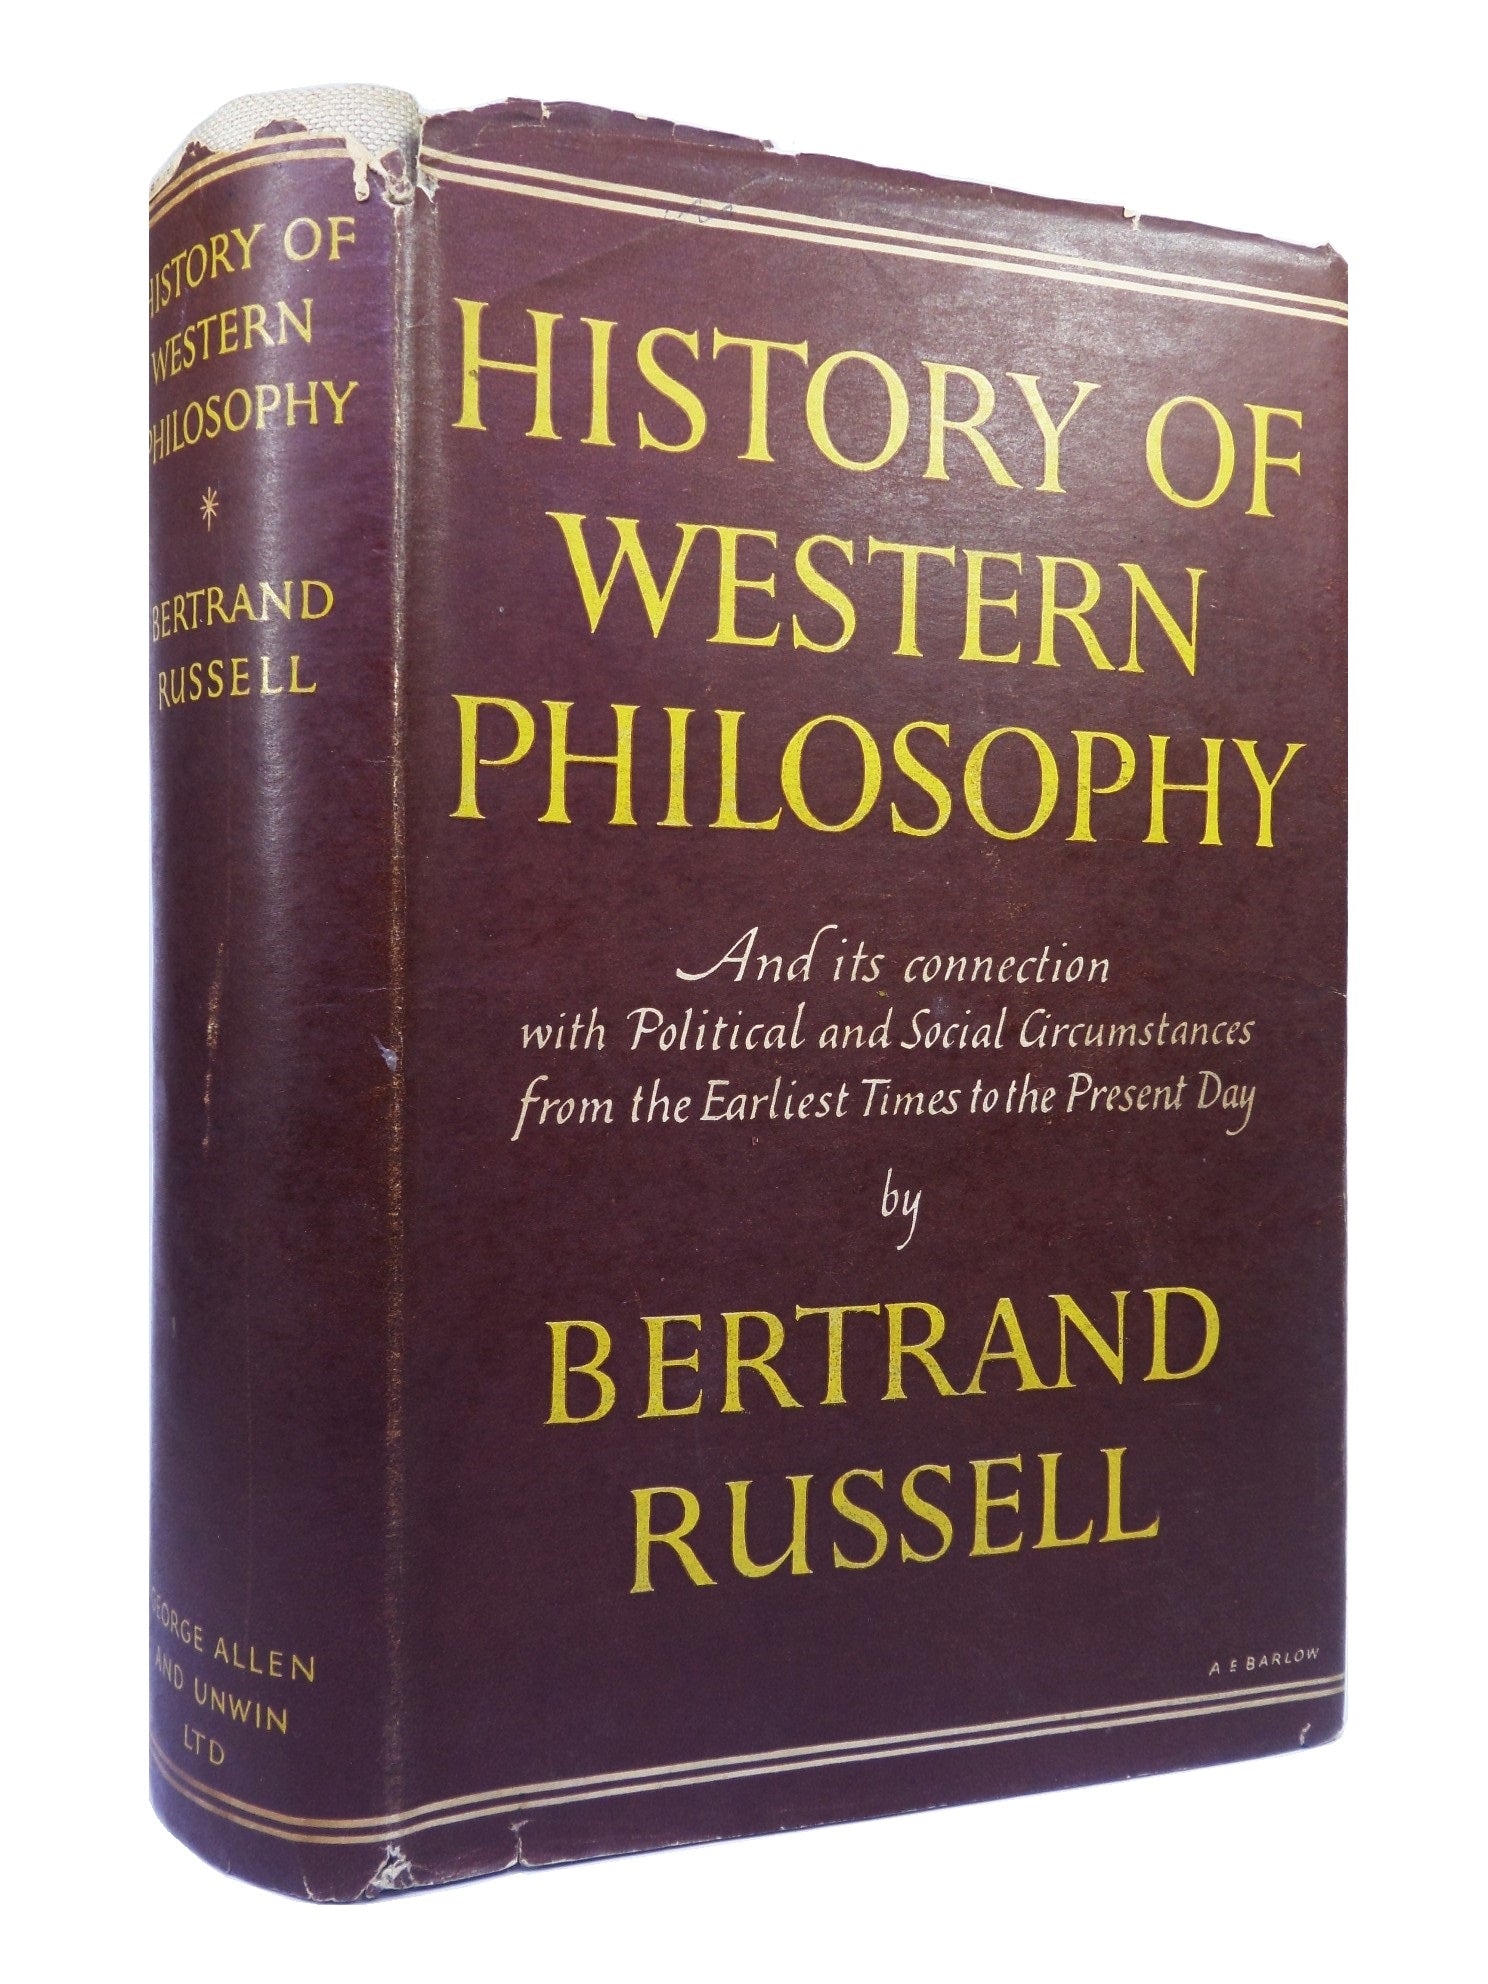 HISTORY OF WESTERN PHILOSOPHY BY BERTRAND RUSSELL 1946 FIRST EDITION